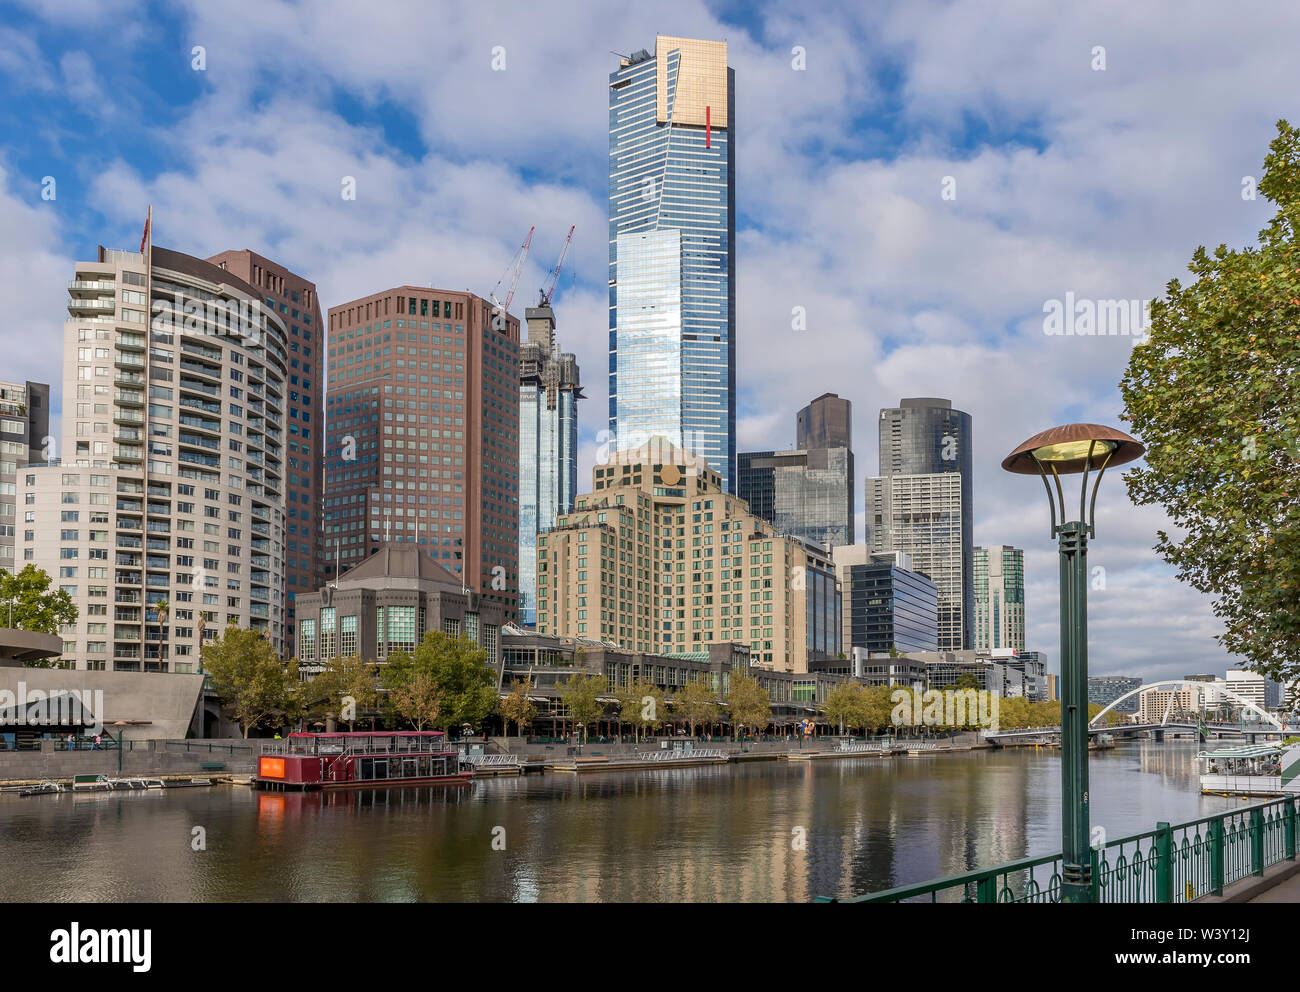 Beautiful view of the city center of Melbourne, Australia, and the Yarra river with reflections of the buildings on the water Stock Photo